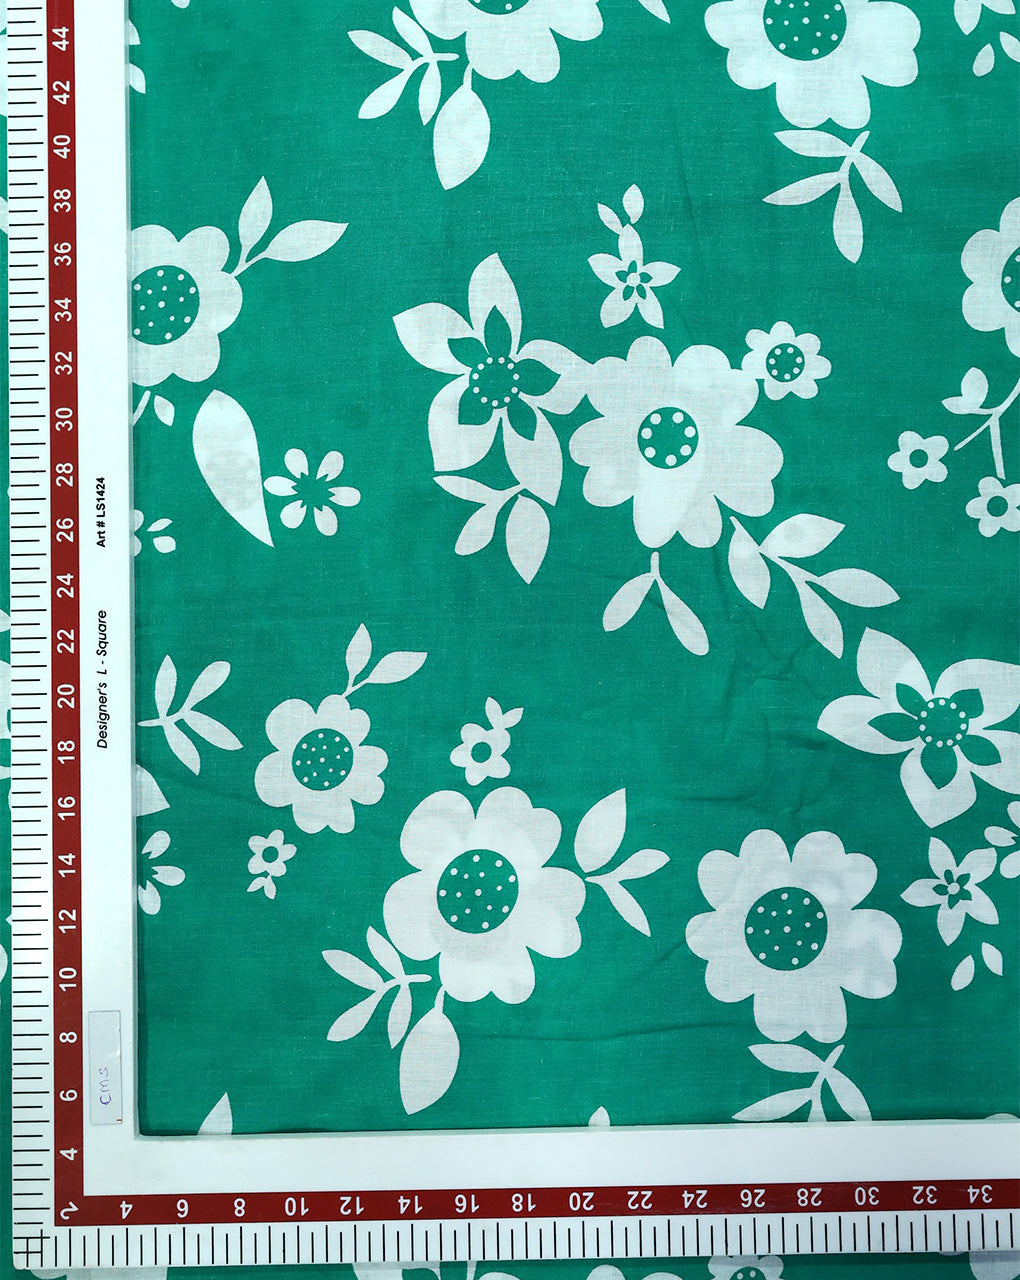 GREEN & WHITE FLORAL DESIGN COTTON PRINTED FABRIC